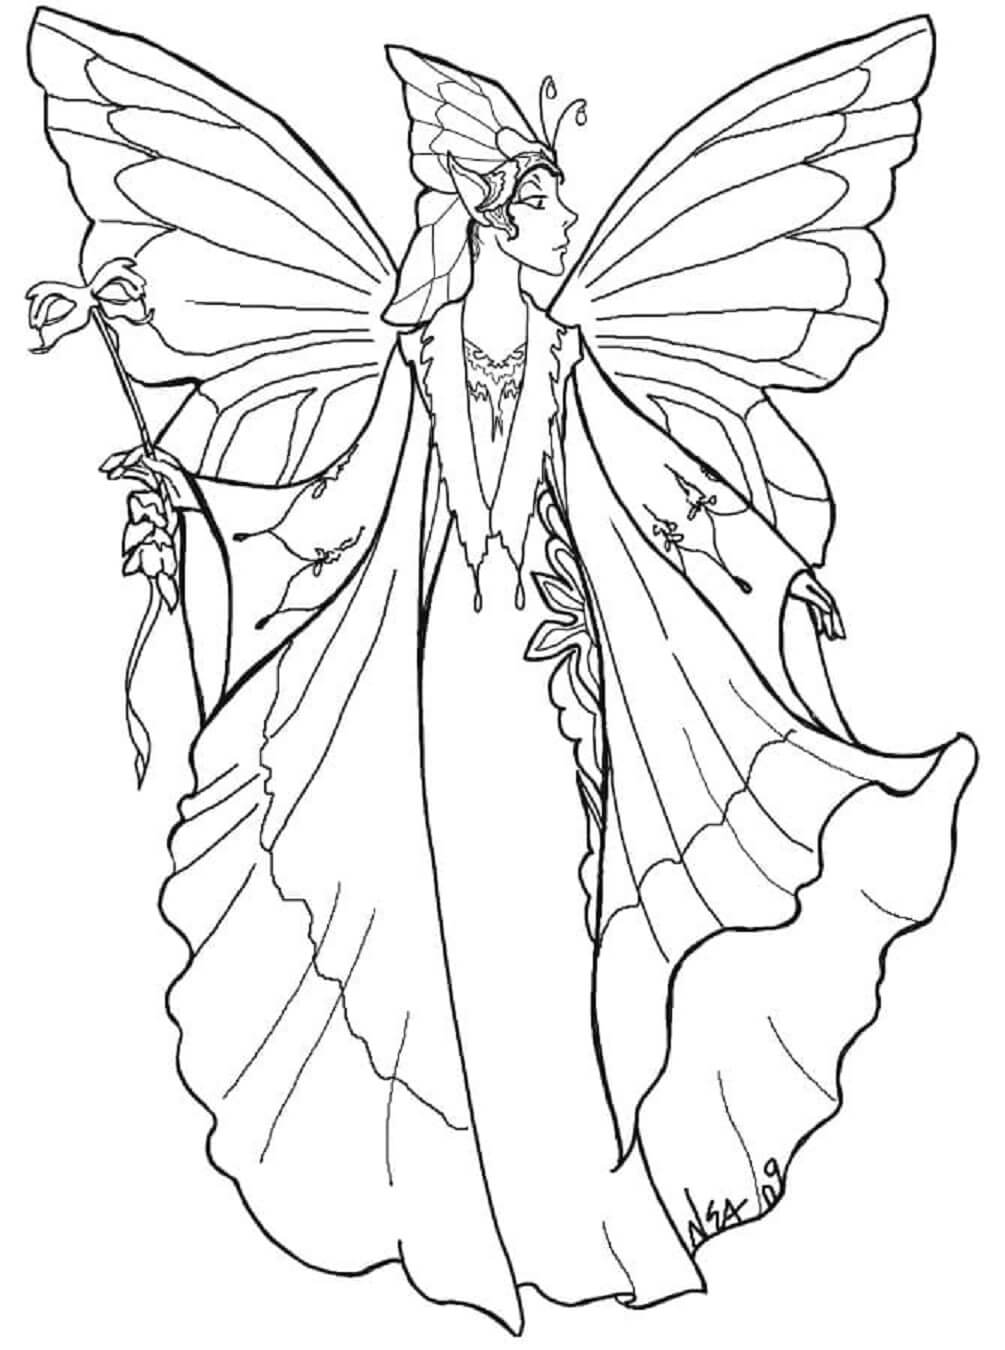 Simple Fairy coloring page - Download, Print or Color Online for Free